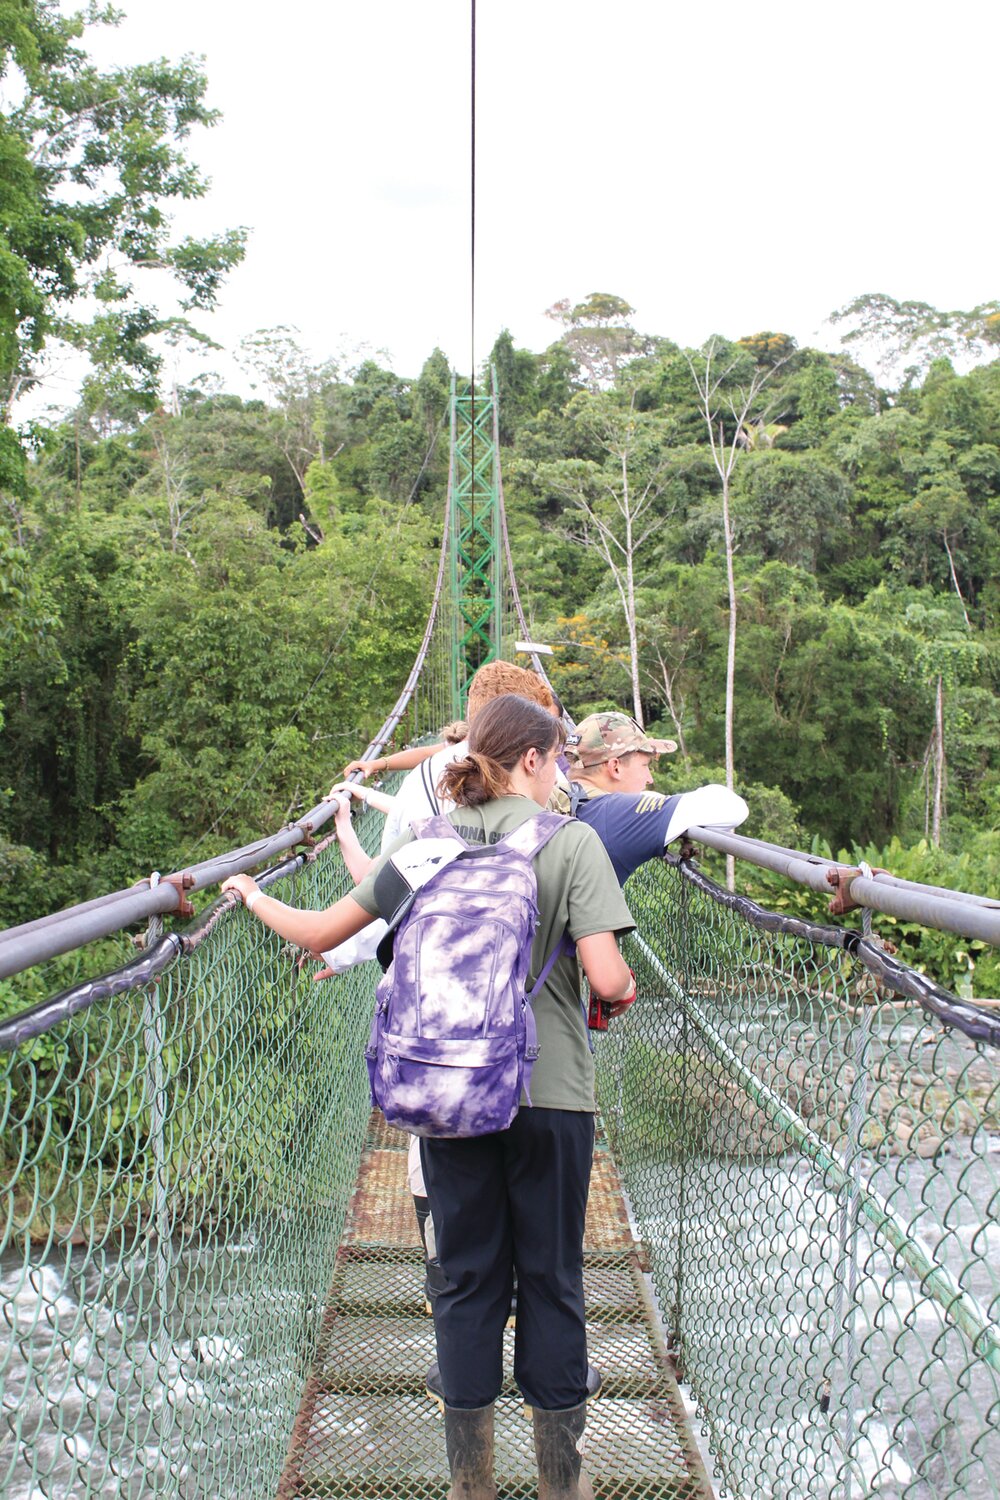 Students from Hunterdon County Vocational School District’s Environmental Sustainability & Engineering Academy and Polytech’s Animal Science programs visited Costa Rica to explore the rain forest this past summer. While there, they were able to view the country’s beauty from its longest suspension bridge.